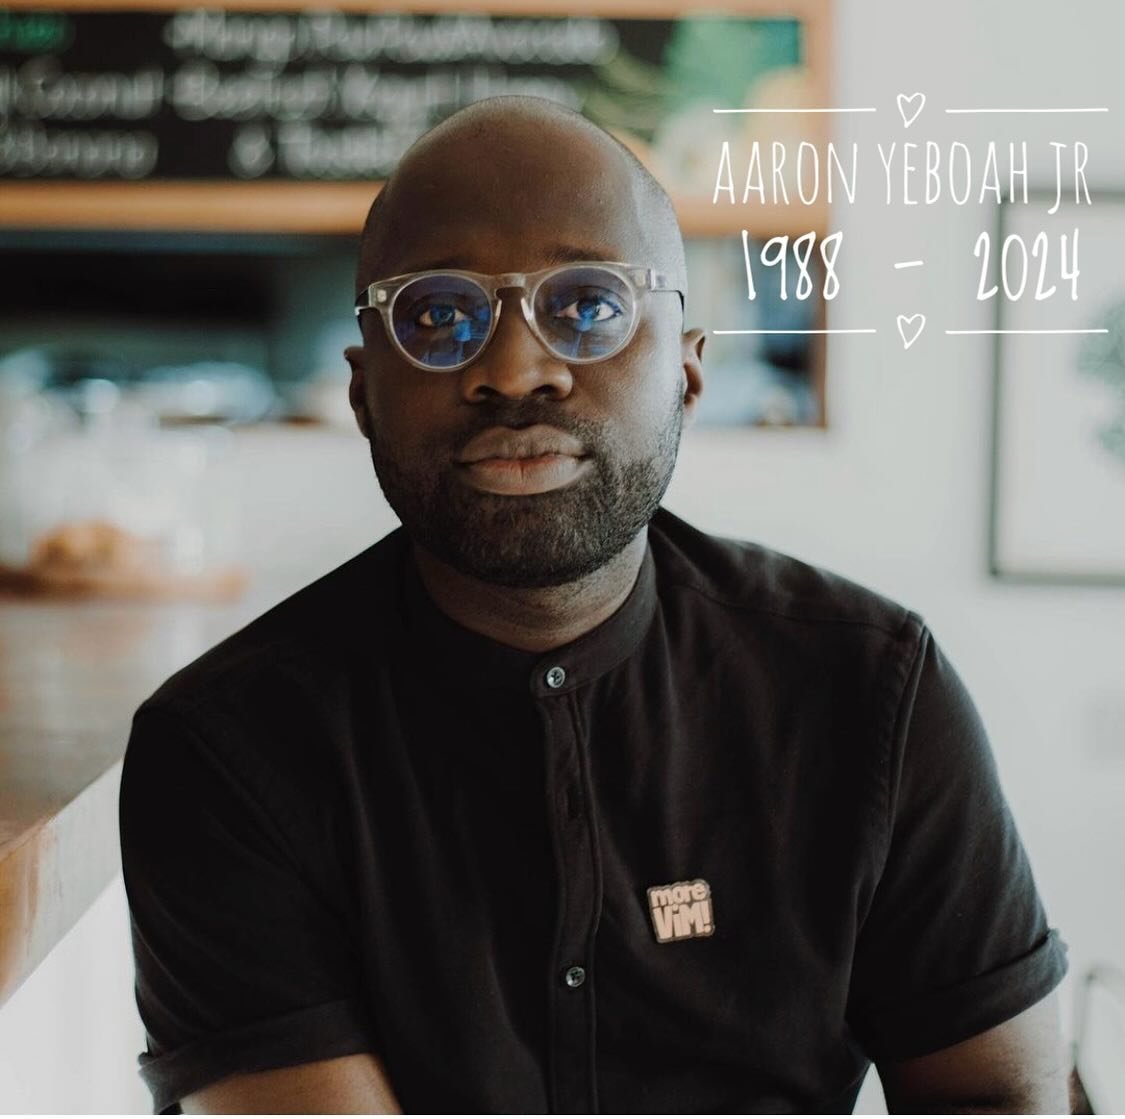 It is with a heavy heart that we announce the passing of our founder, Aaron Yeboah Jr. 

We ask that you keep his family and loved ones in your thoughts and prayers during this difficult time.

We will get back with you with any further updates as we